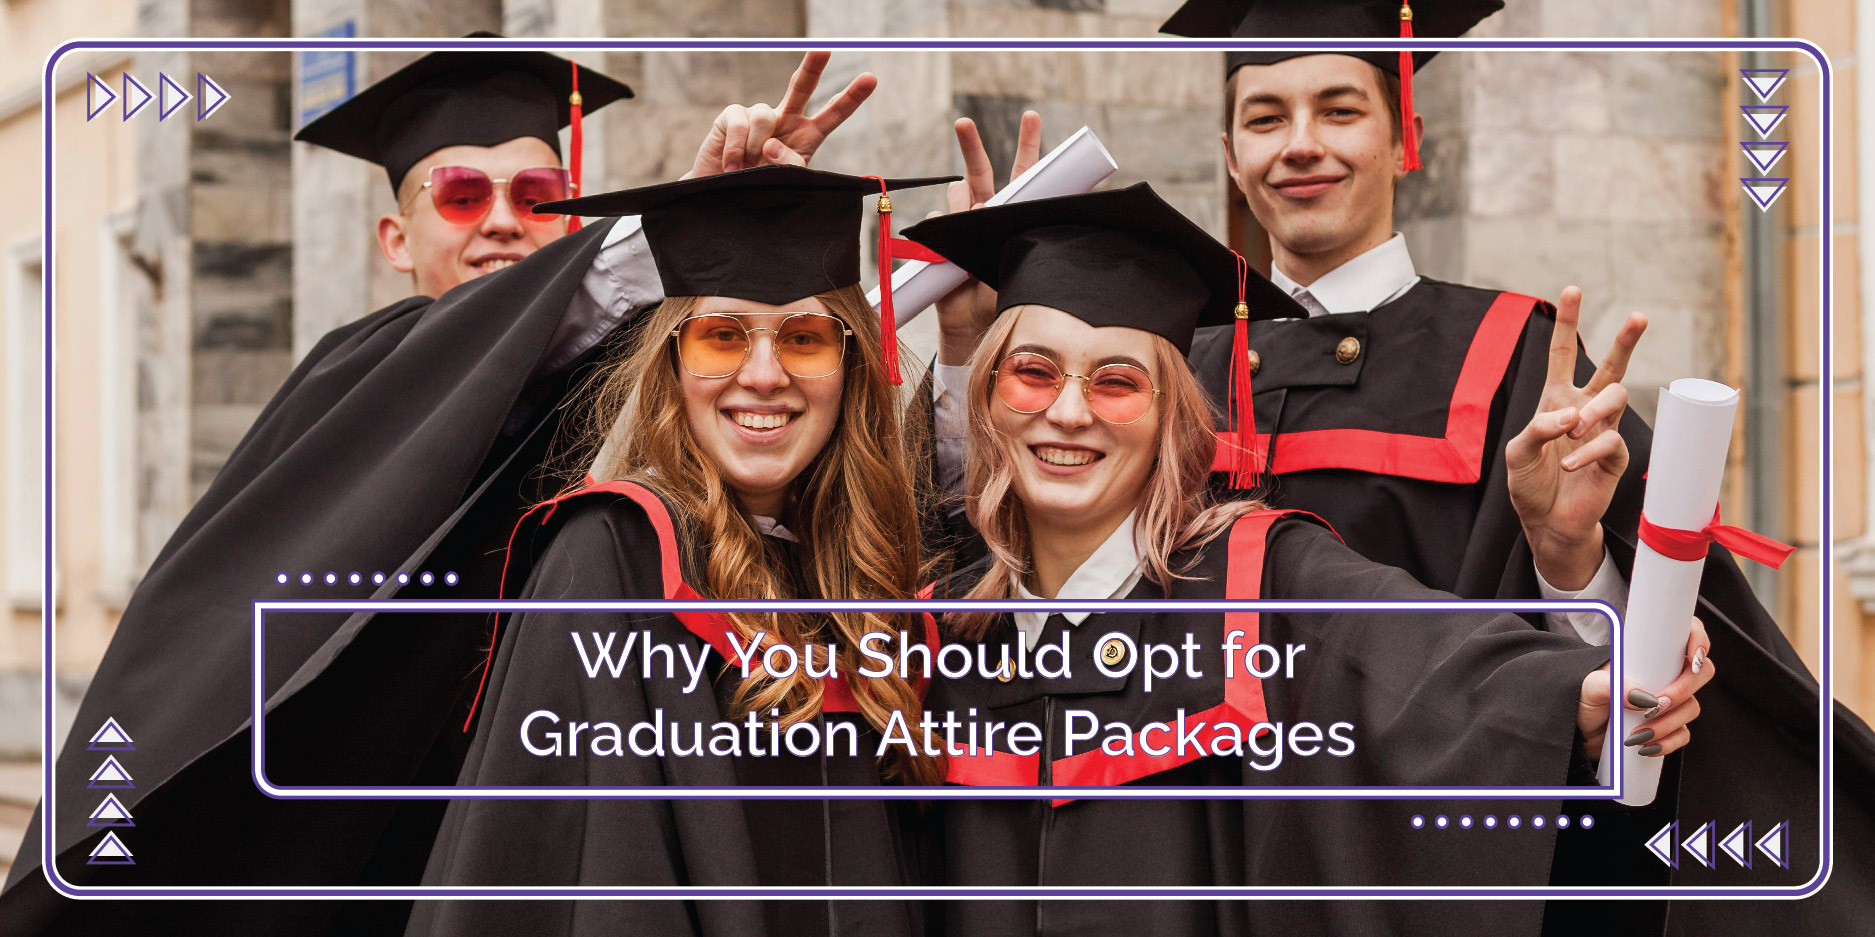 Why You Should Opt for Graduation Attire Packages